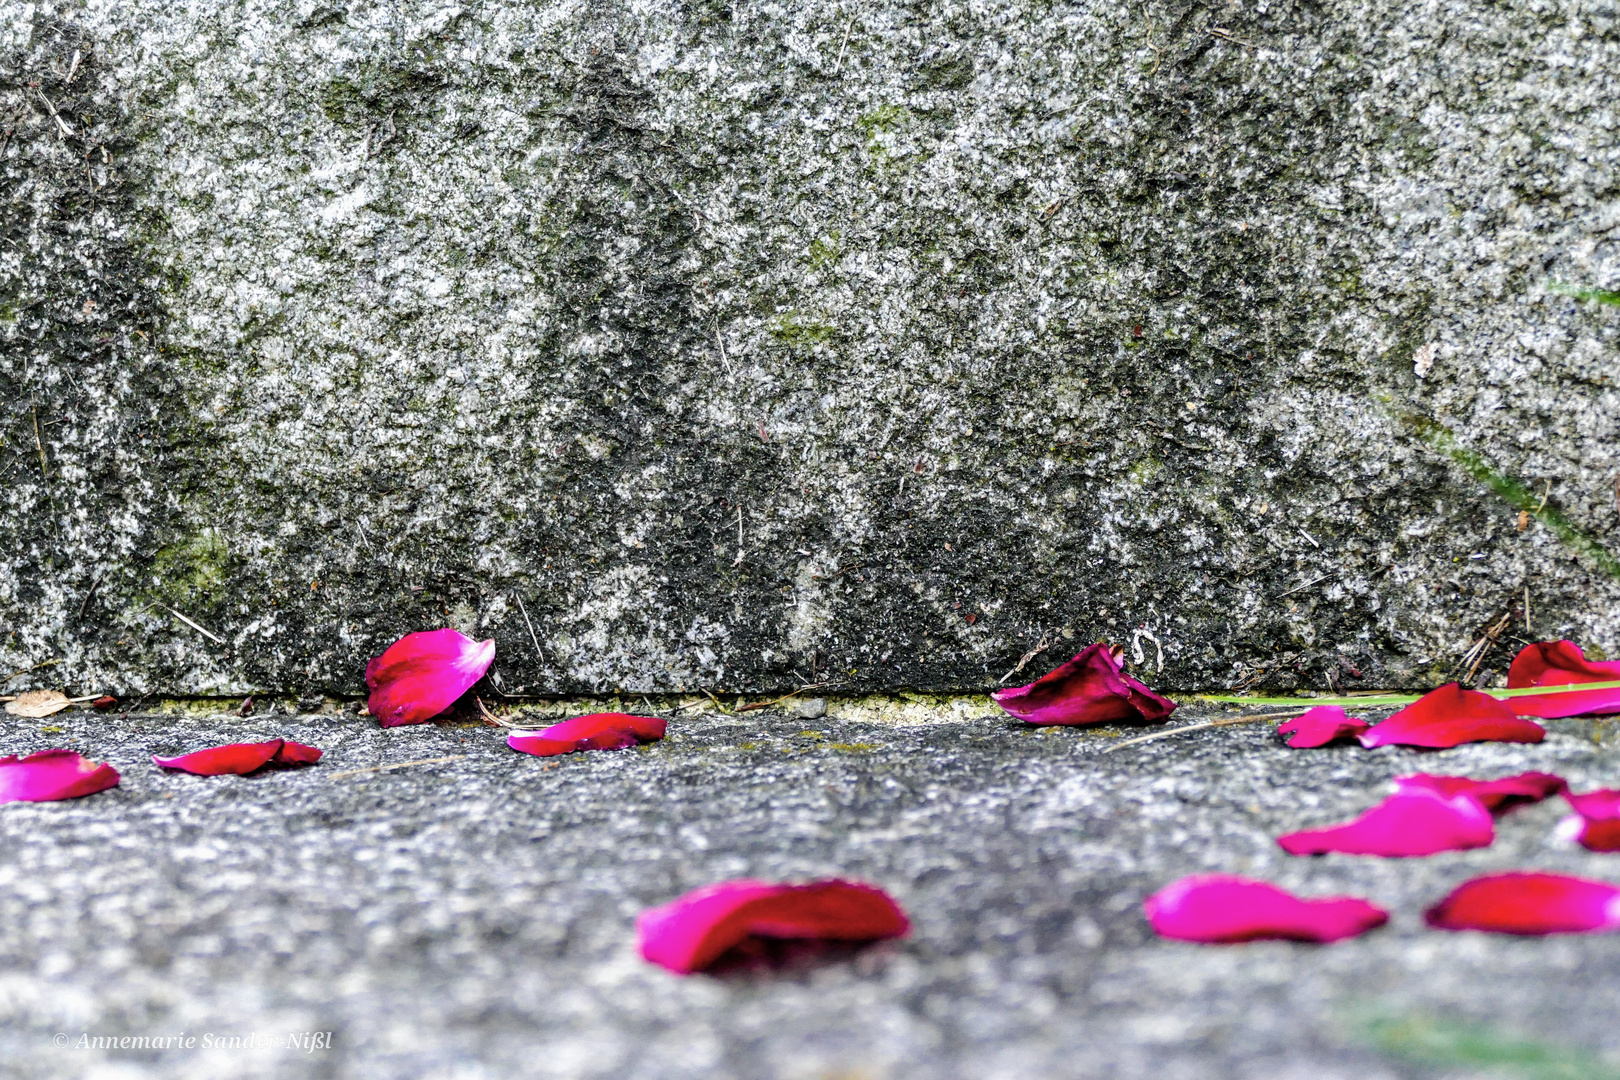 Petals on the stairs